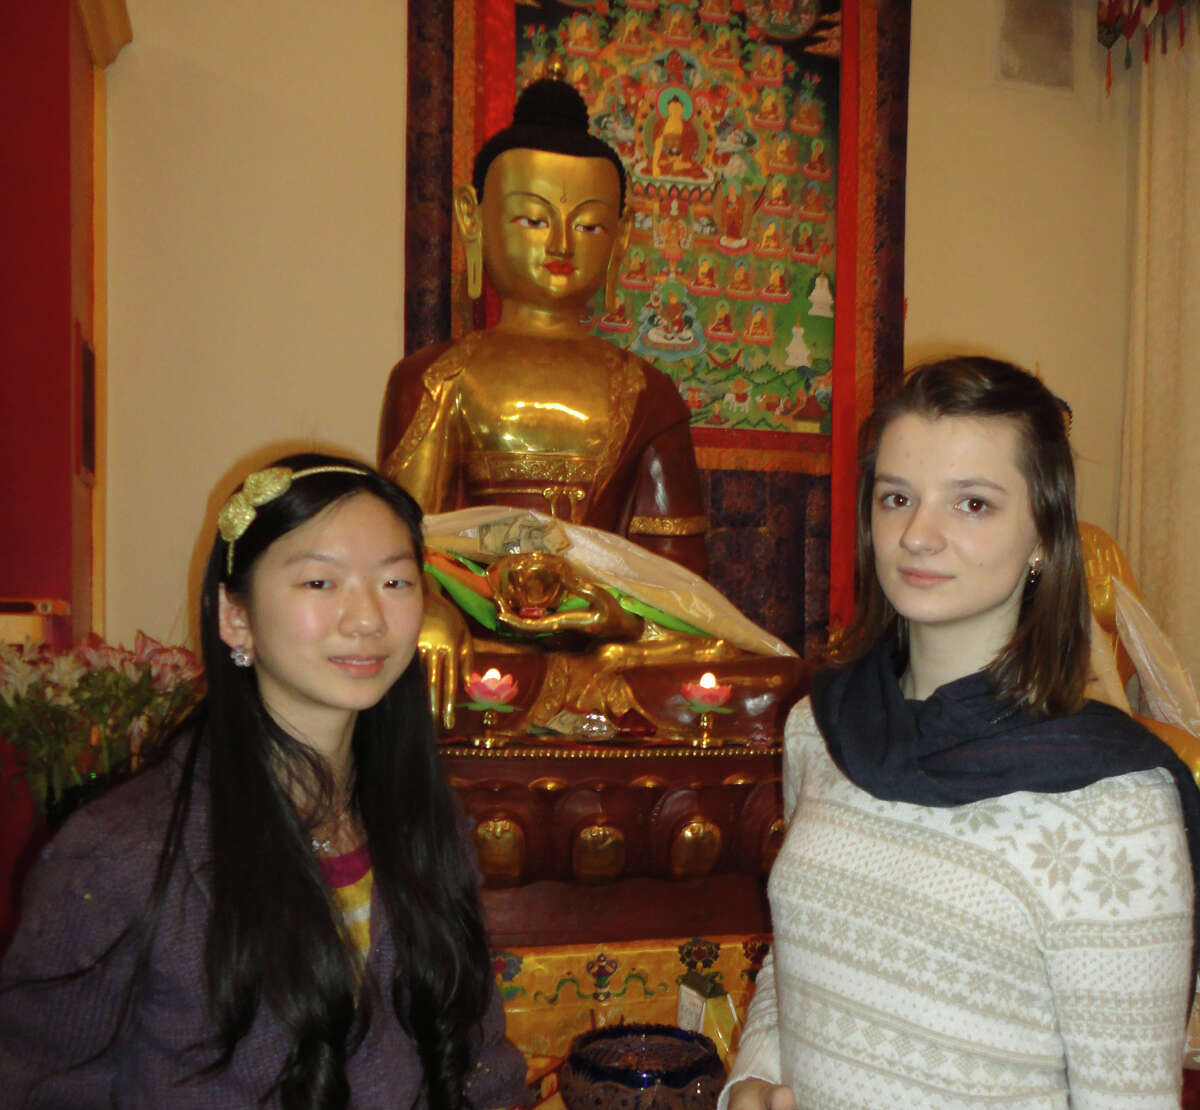 Chiana Yang, left, 14, and Alisa Korneyeva, 15, freshmen at Fairfield Warde High School, in front of a statue of Buddha at the Tibetan Buddhist Center for Universal Peace in Redding, which they visited Tuesday. Fairfield CT 1/8/13